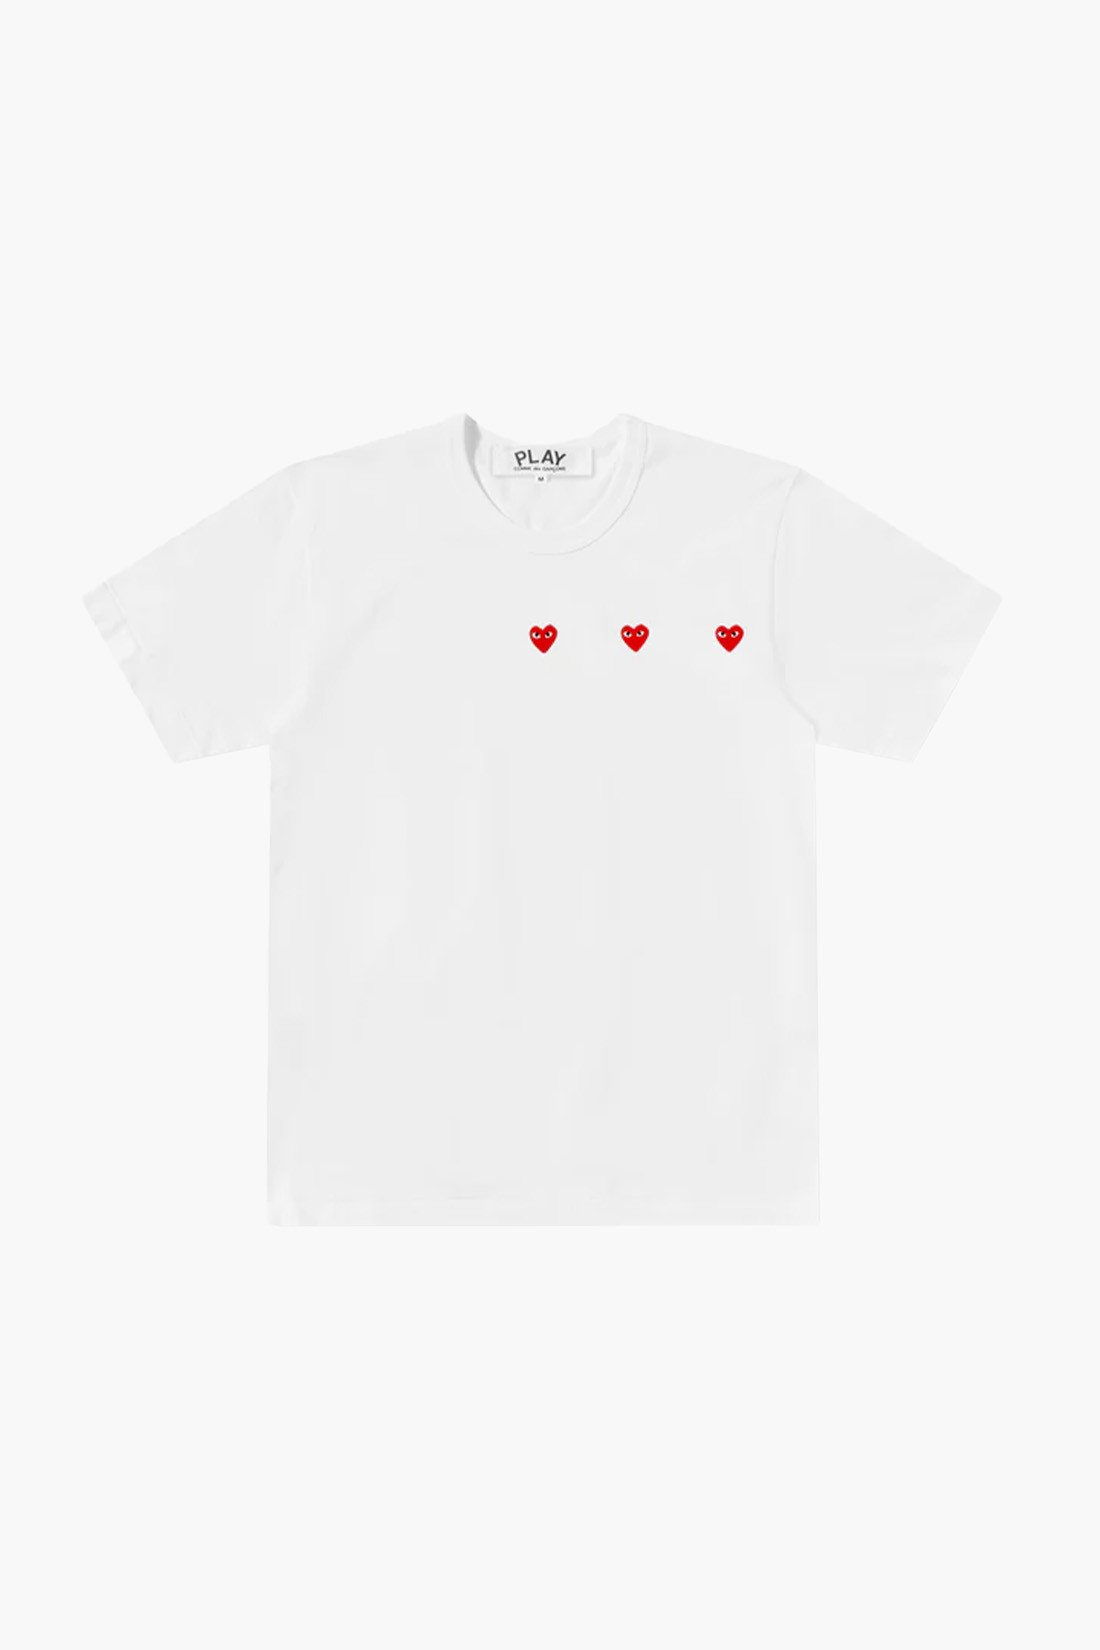 Play multi red heart t-shirt White